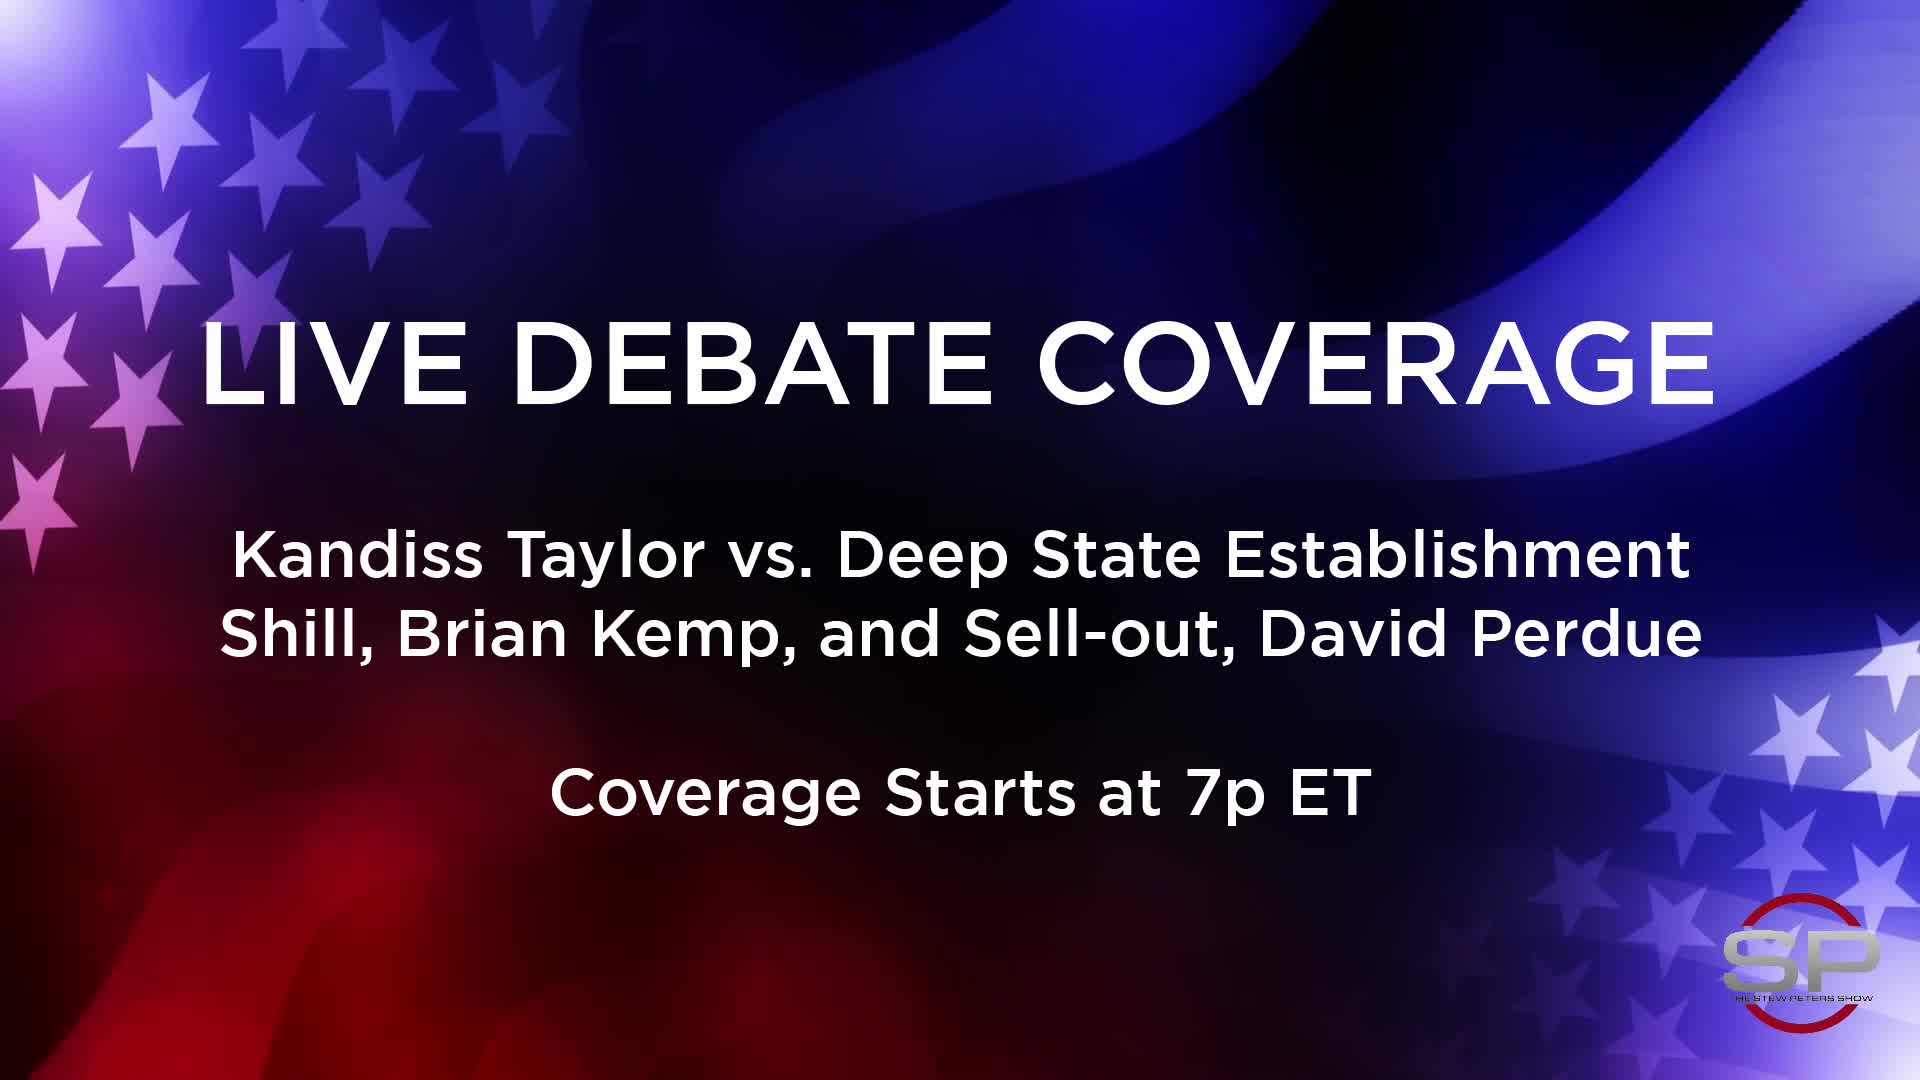 LIVE DEBATE! Kandiss Taylor vs Deep State Establishment Shill Brian Kemp and Sell-Out David Perdue